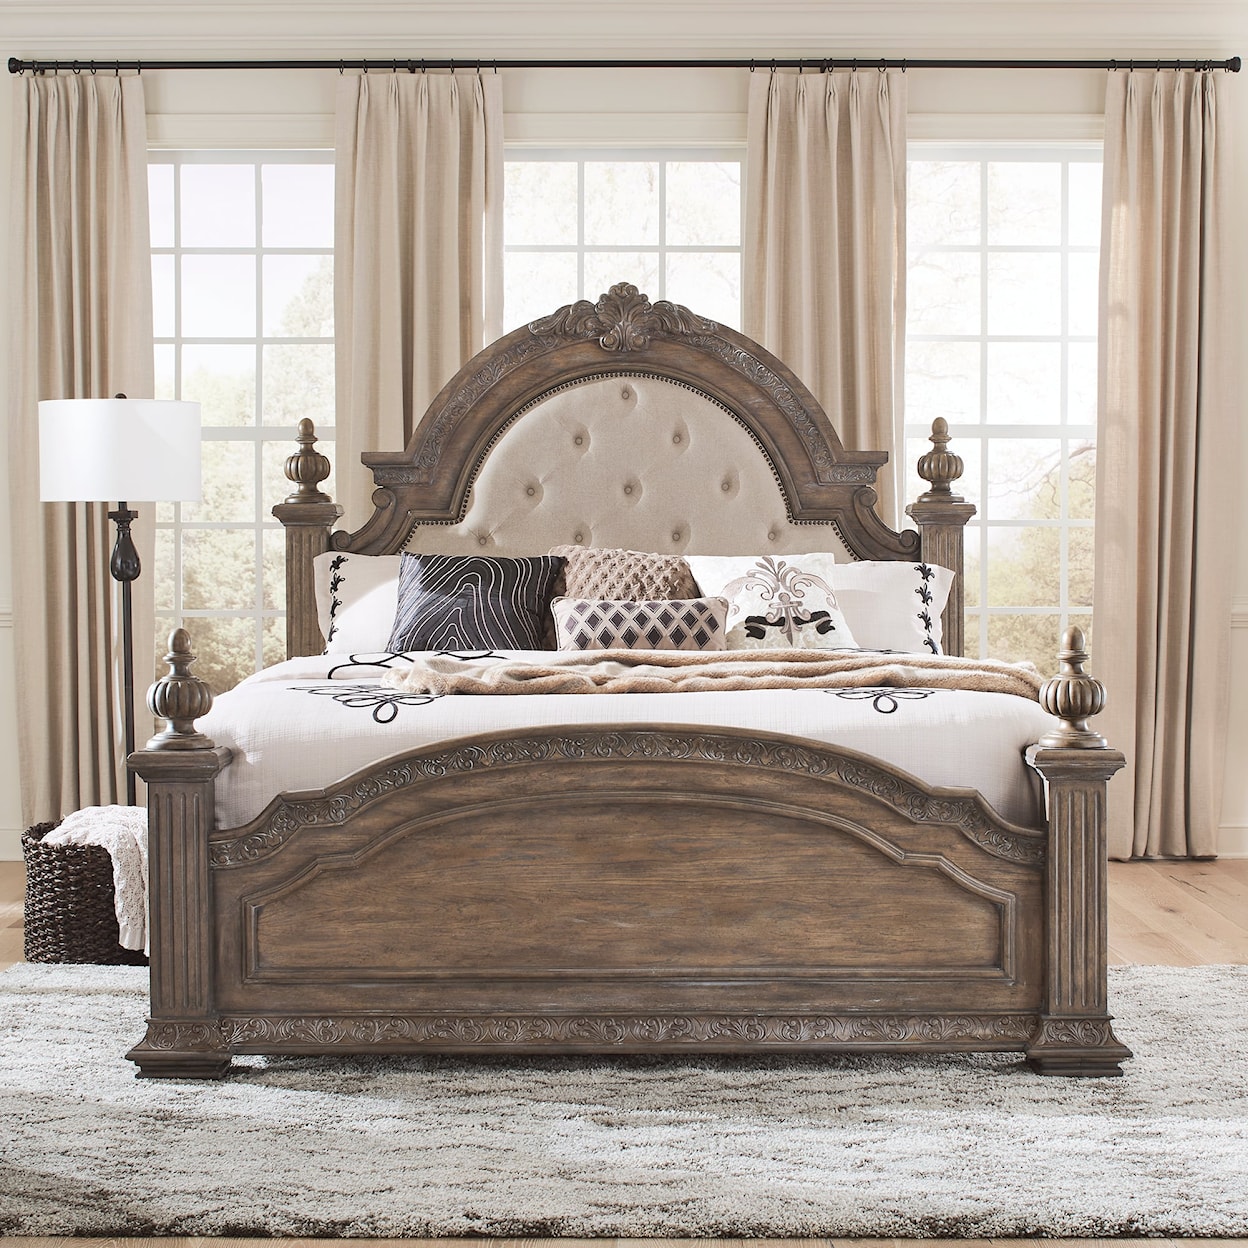 Libby Carlisle Court Queen Upholstered Poster Bed 